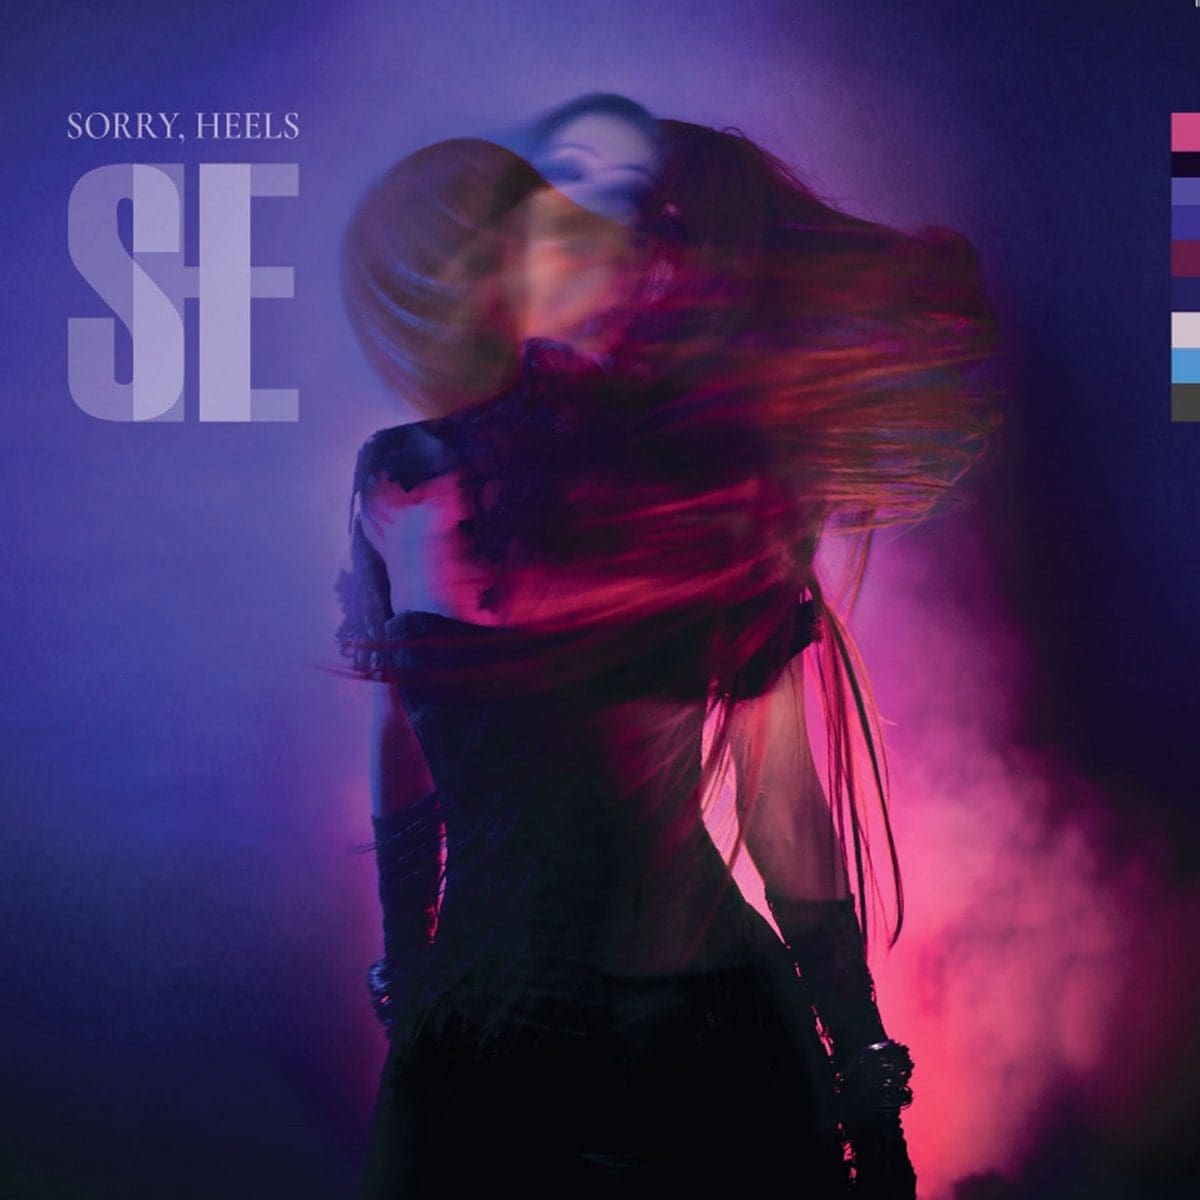 Italian shoegaze / post-punk act Sorry, Heels return with 2nd album 'She', 6 years after their debut album